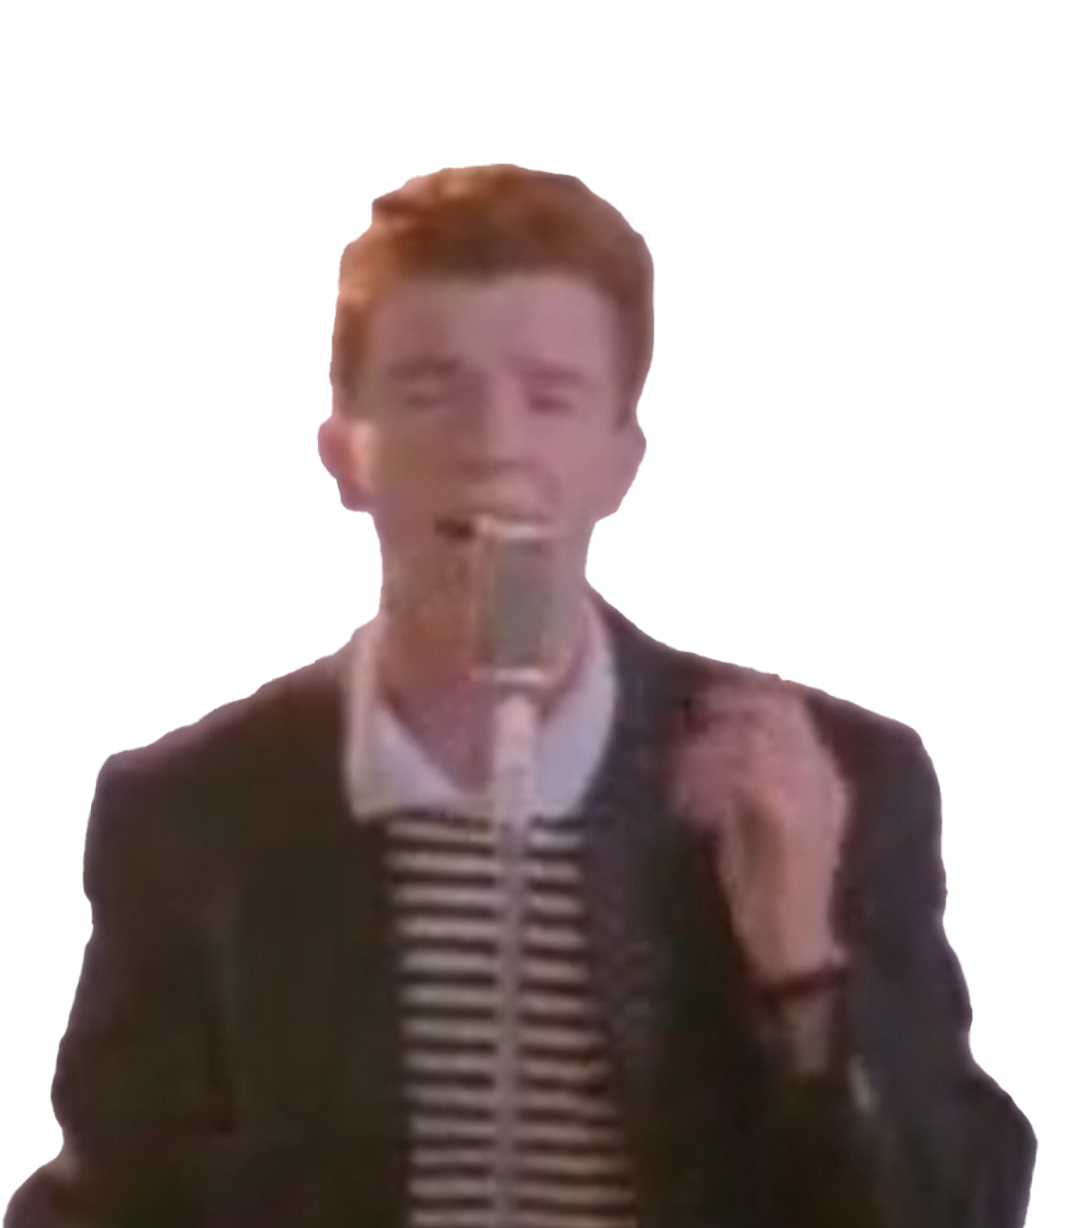 Rick Roll Background